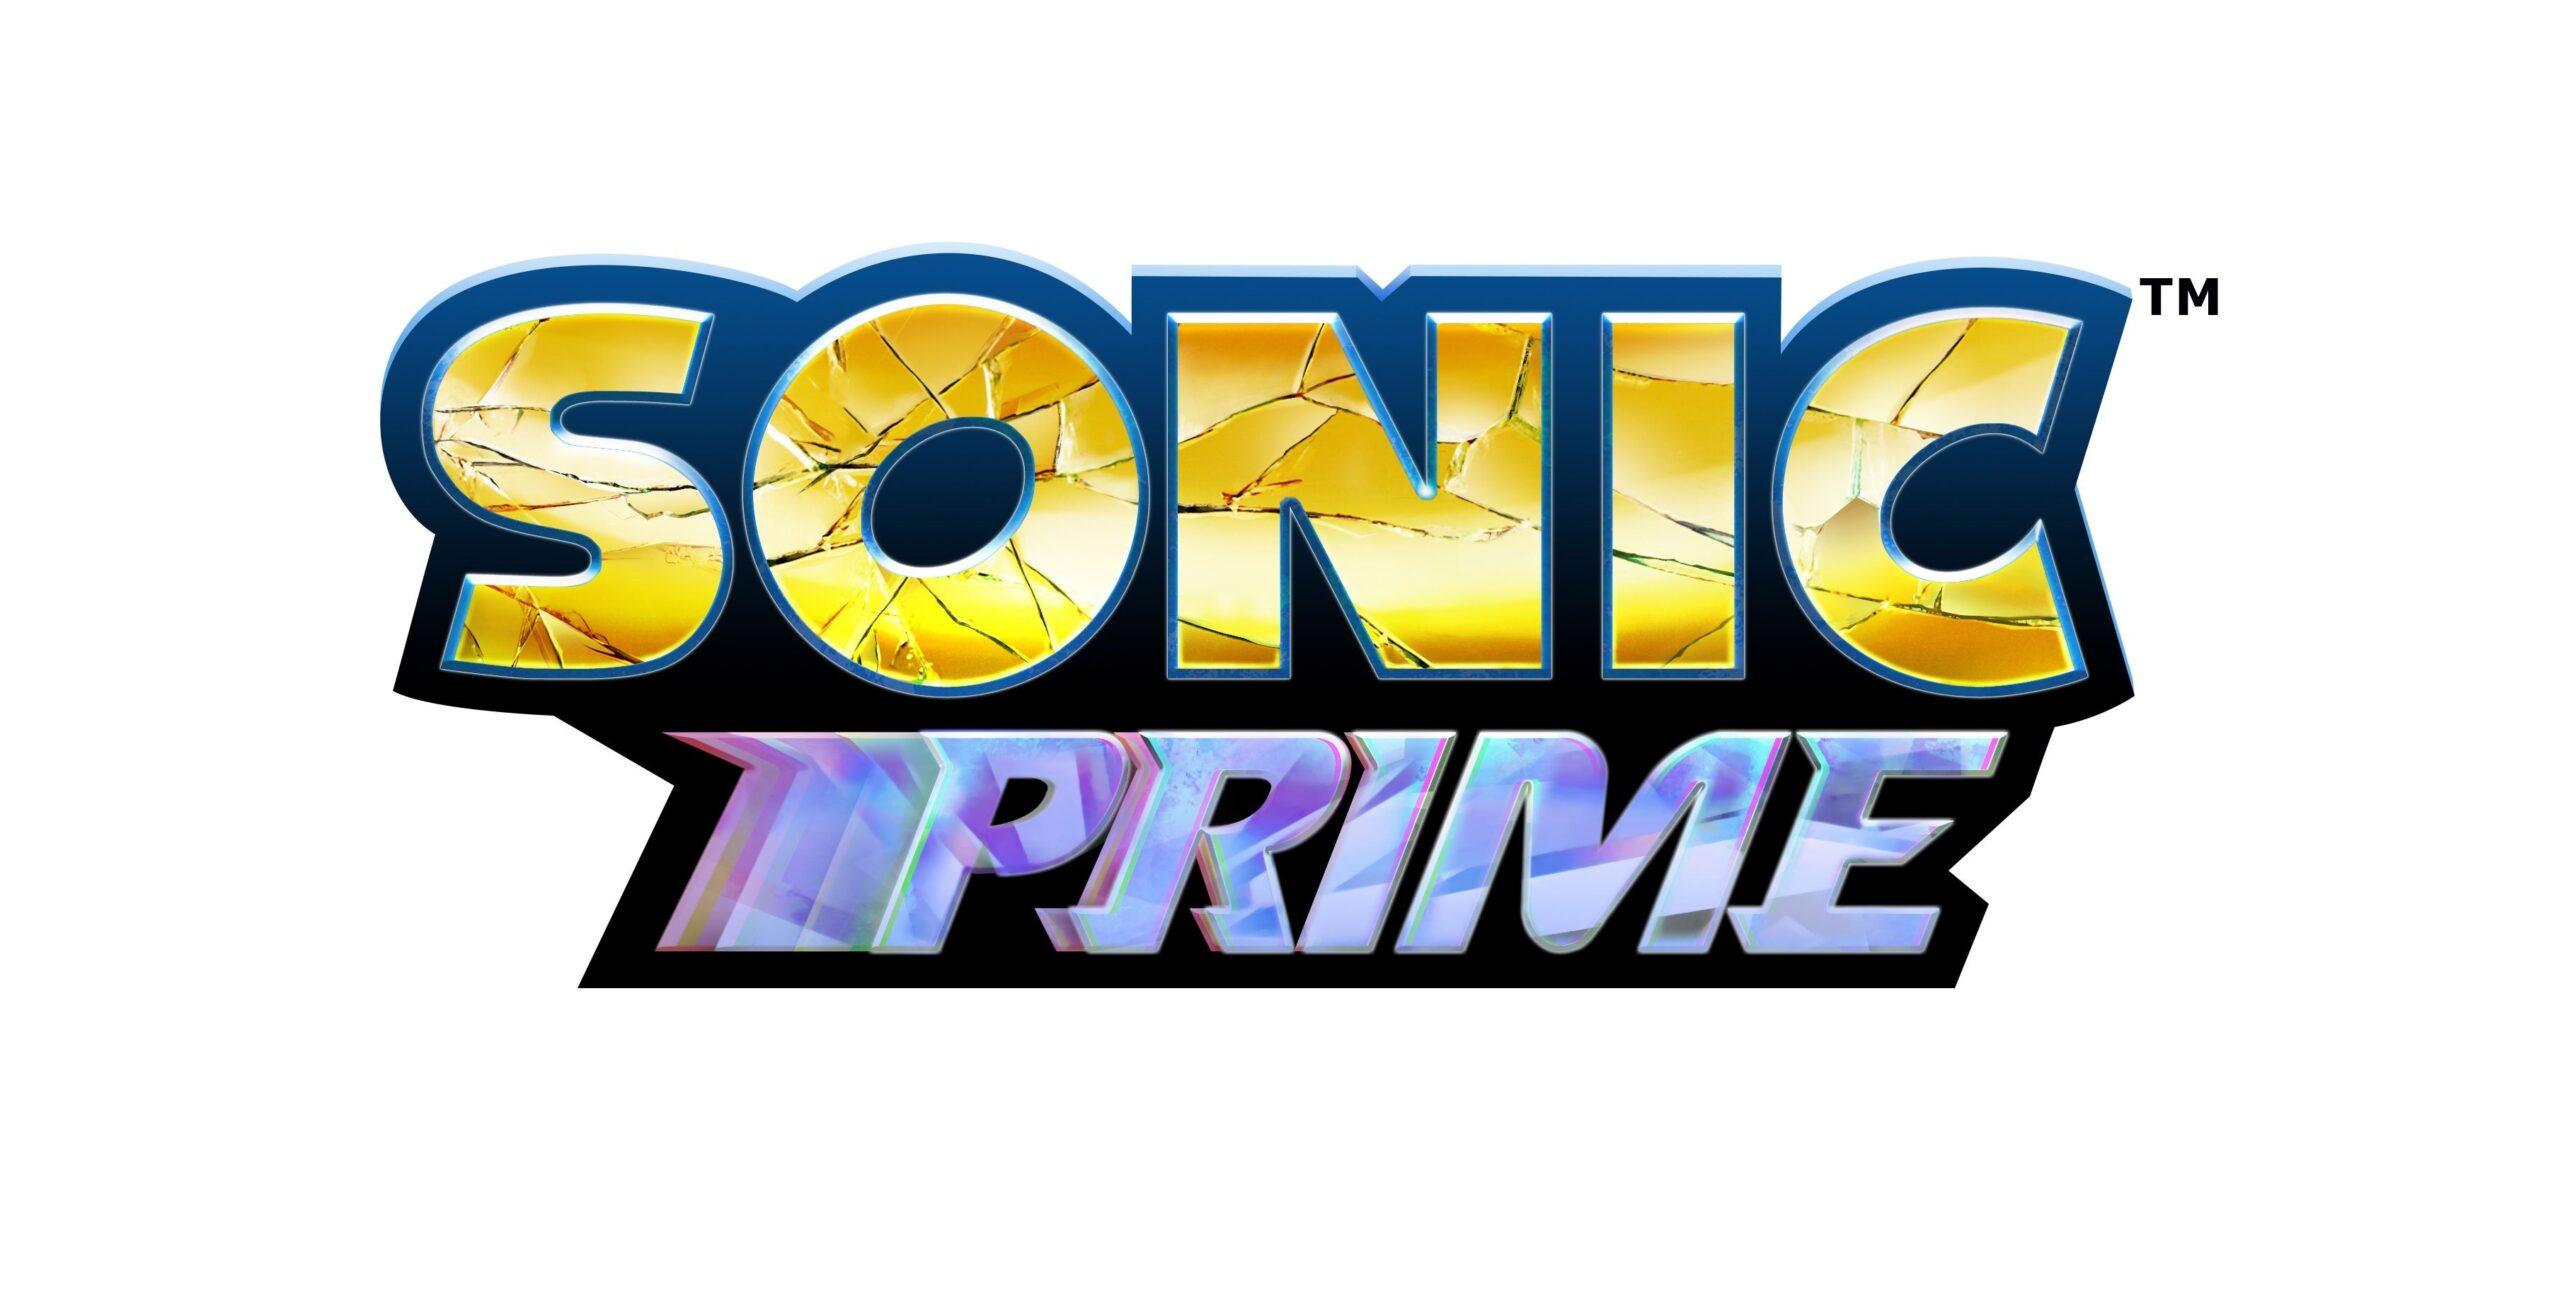 NEW Sonic Prime Toys Coming In 2023! 